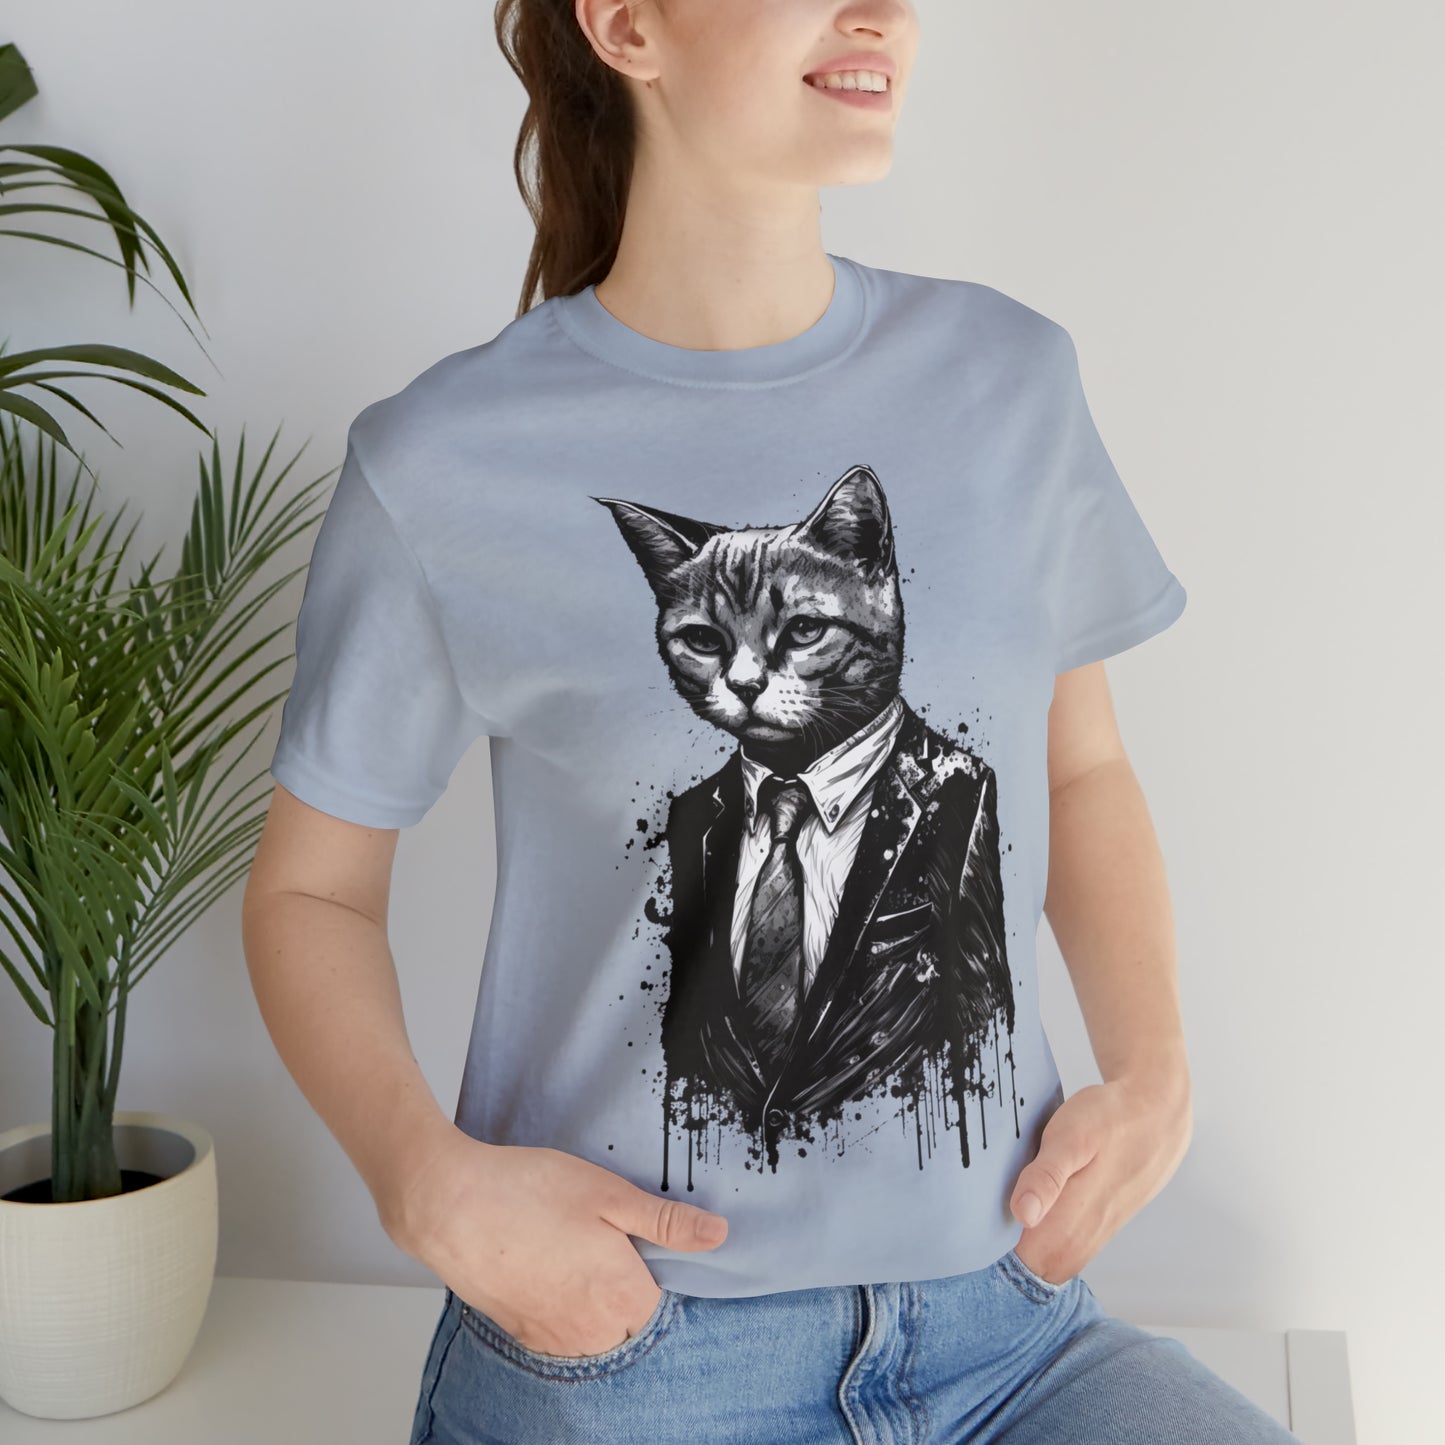 Elegant Cat in a Suit T-shirt, Cat Suit Outfit Tee shirt, Black Suit shirt, Business cat shirt, Boss cat tshirt, gift for cat lover